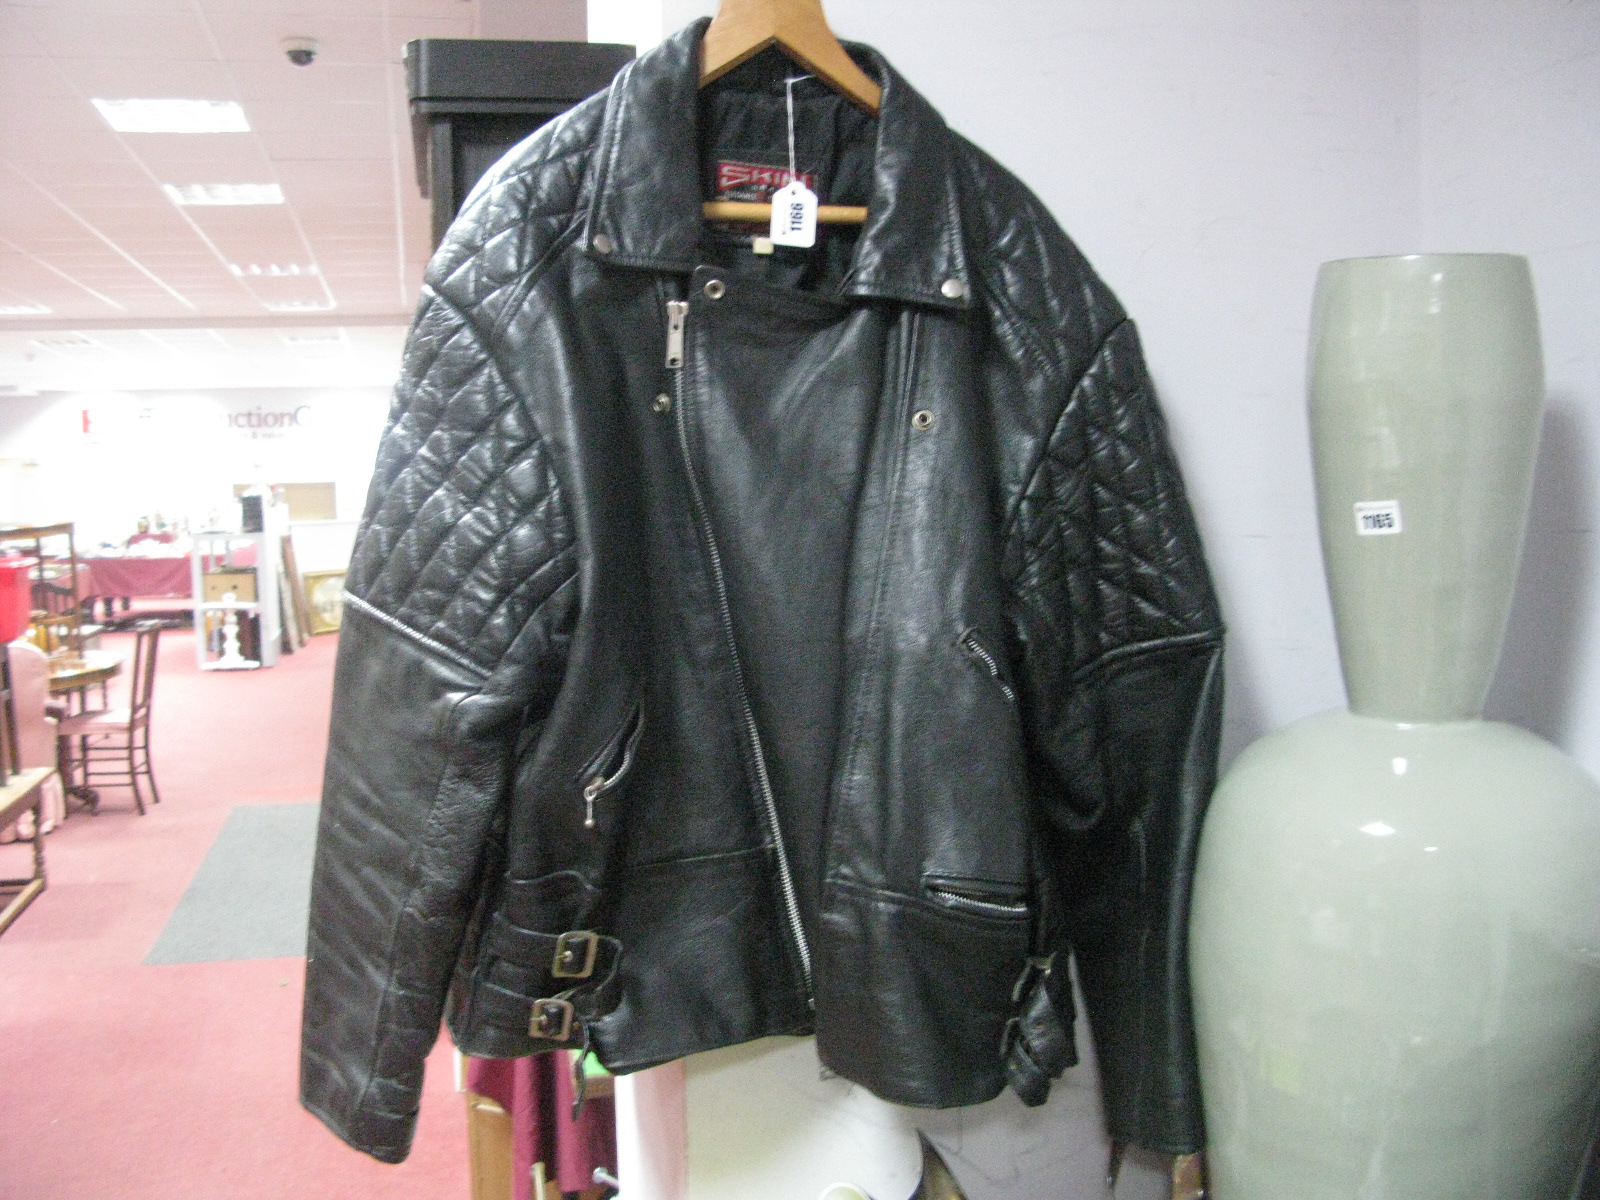 A Gents 'Skin' Real Leather Bikers Jacket, polyester lined '52' size stitched in lining.